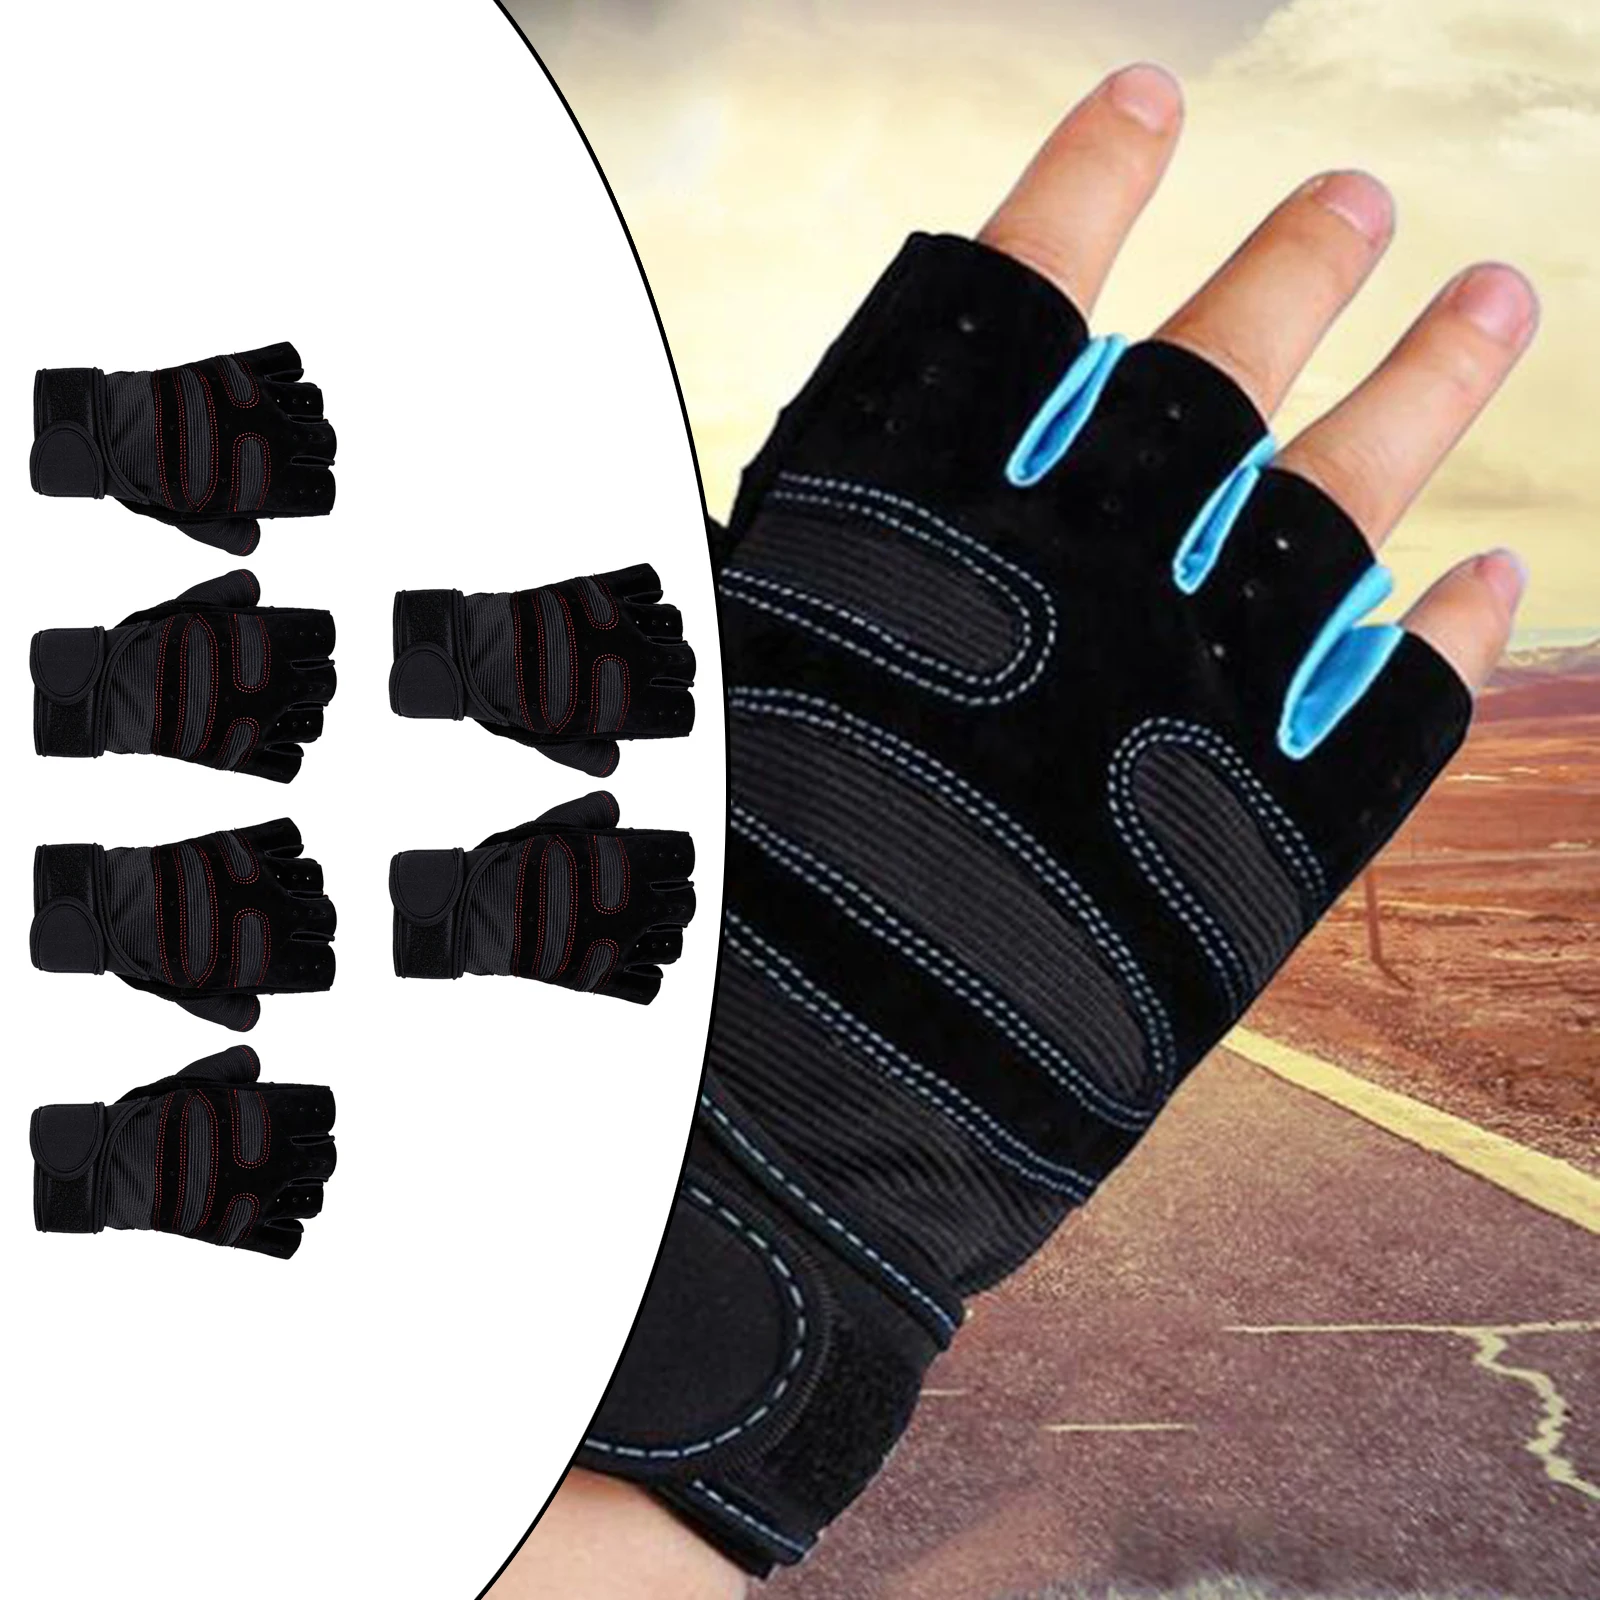 Dumbbell Fitness Gloves Exercise Half Finger Weight Lifting Gloves Body Building Training Cycling Gym Workout for Men Women